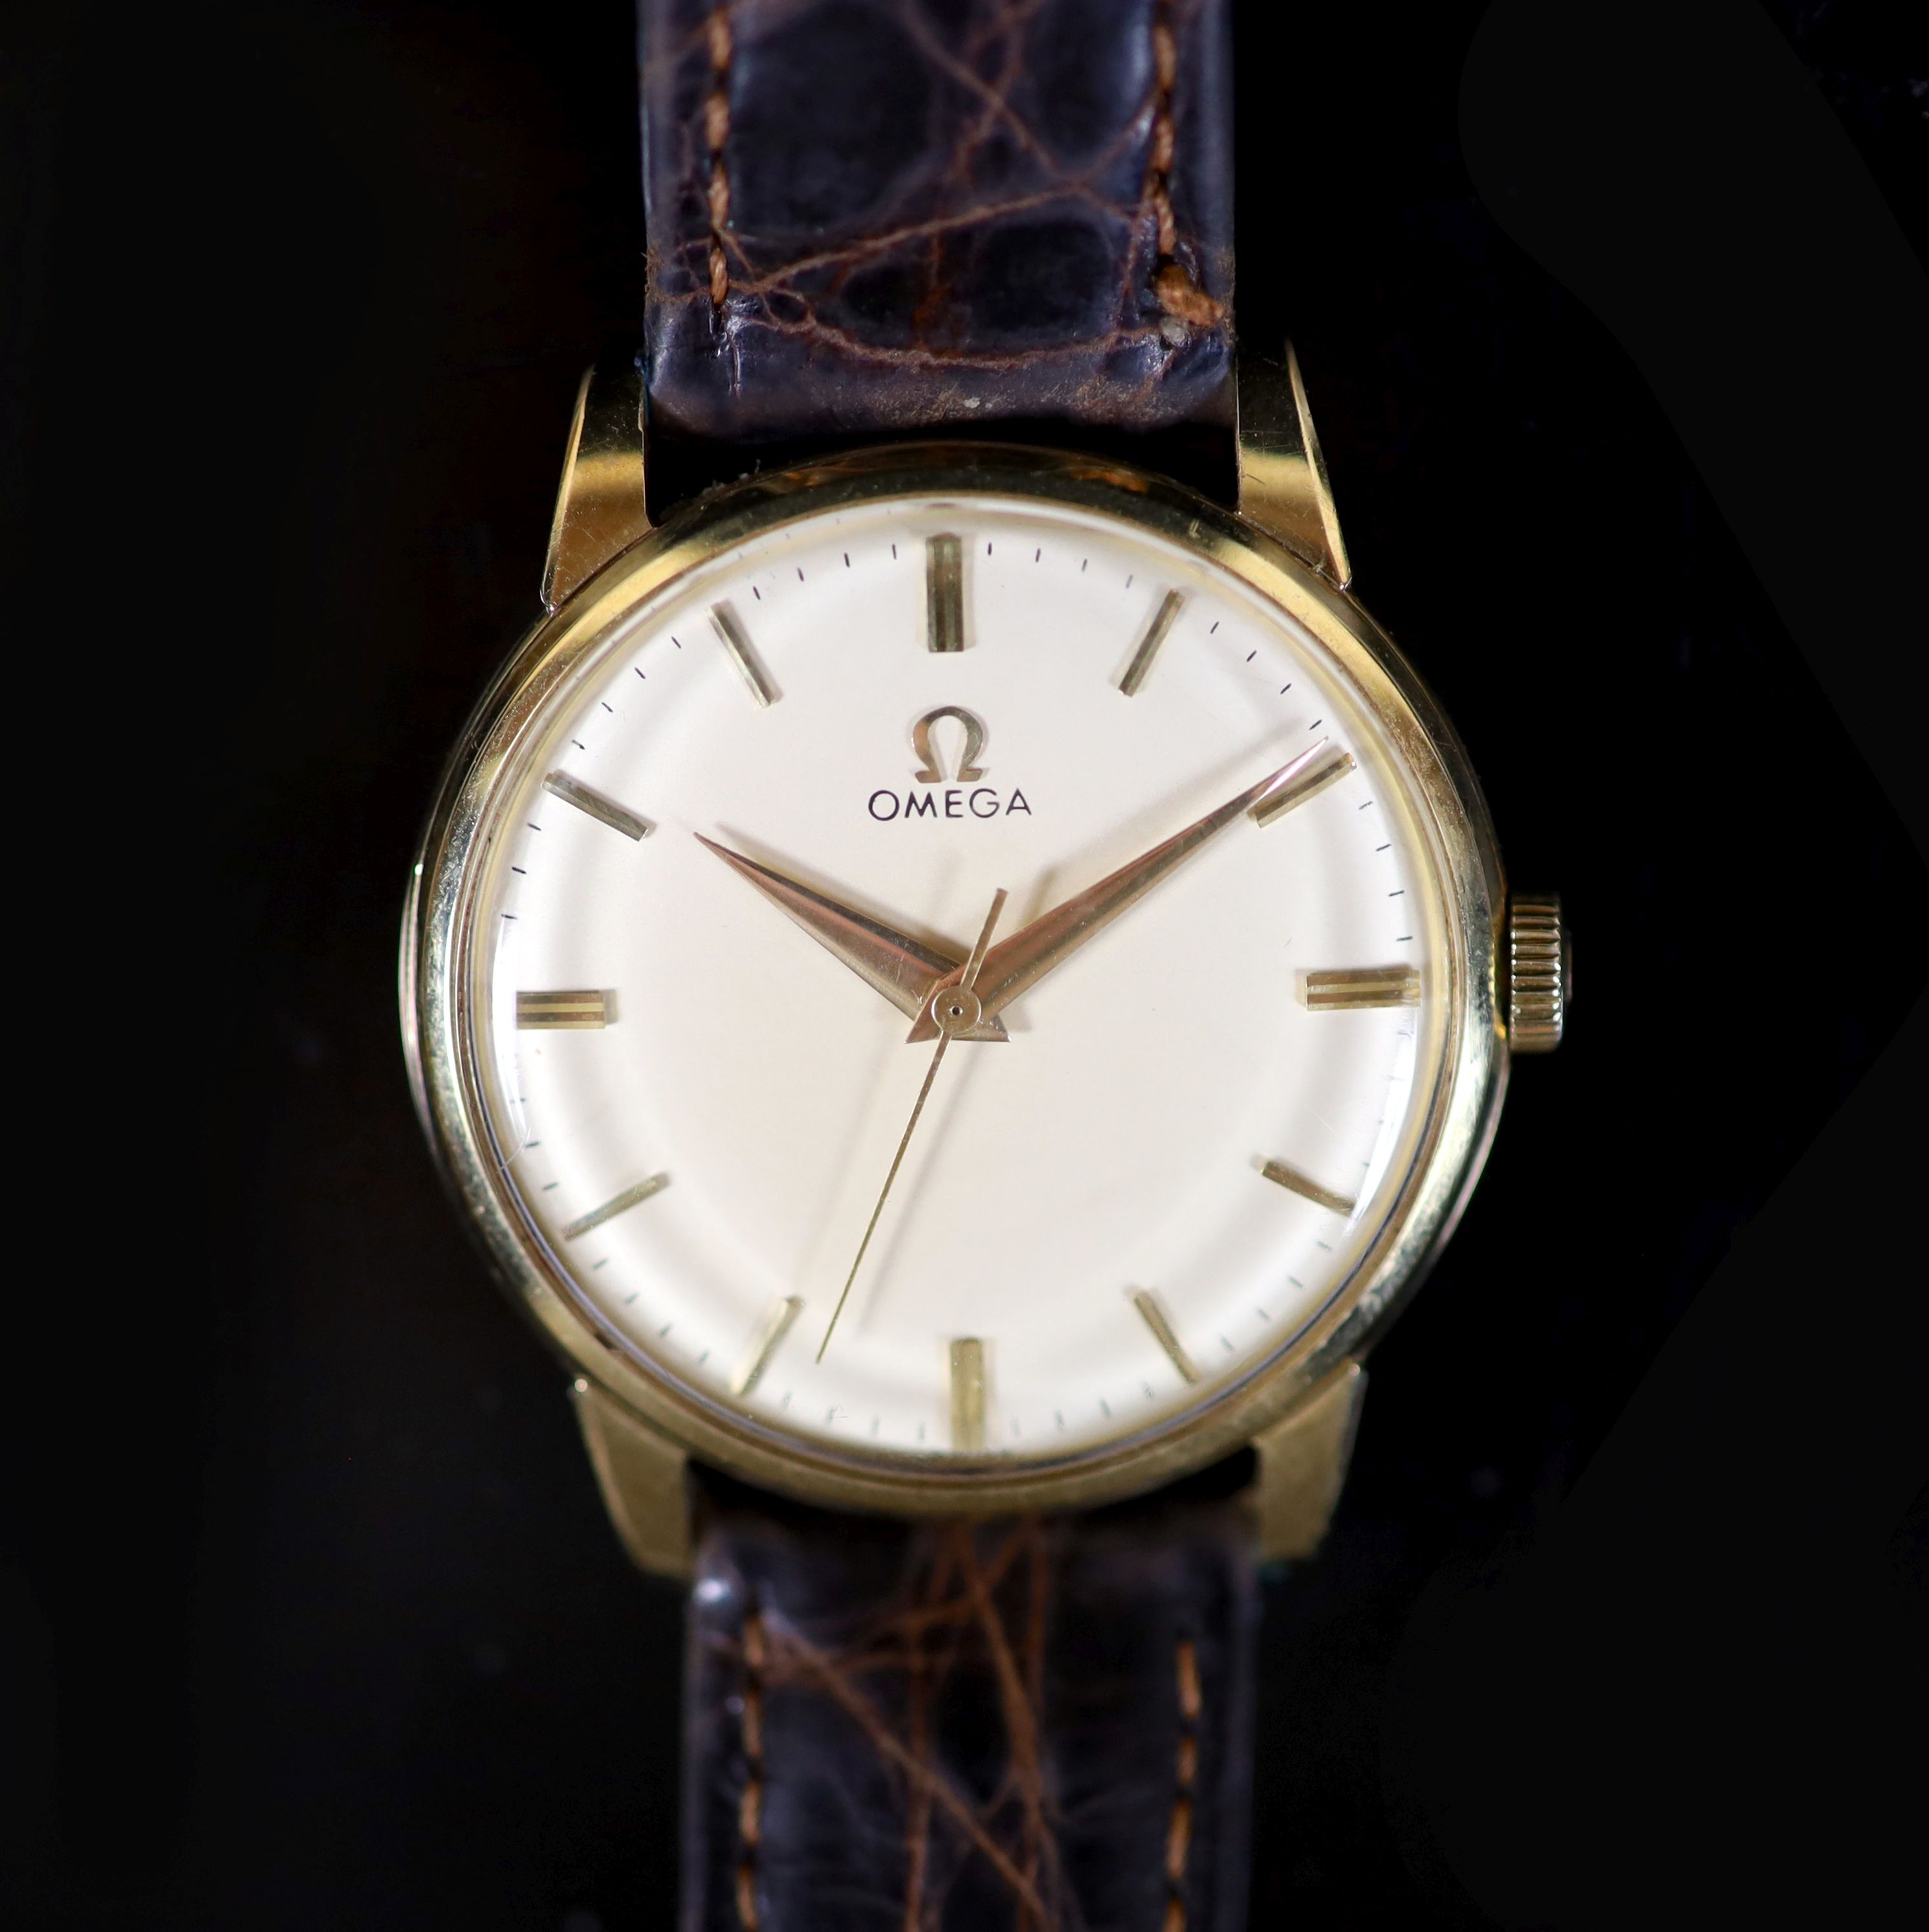 A gentleman's late 1950's 14ct gold Omega manual wind wrist watch